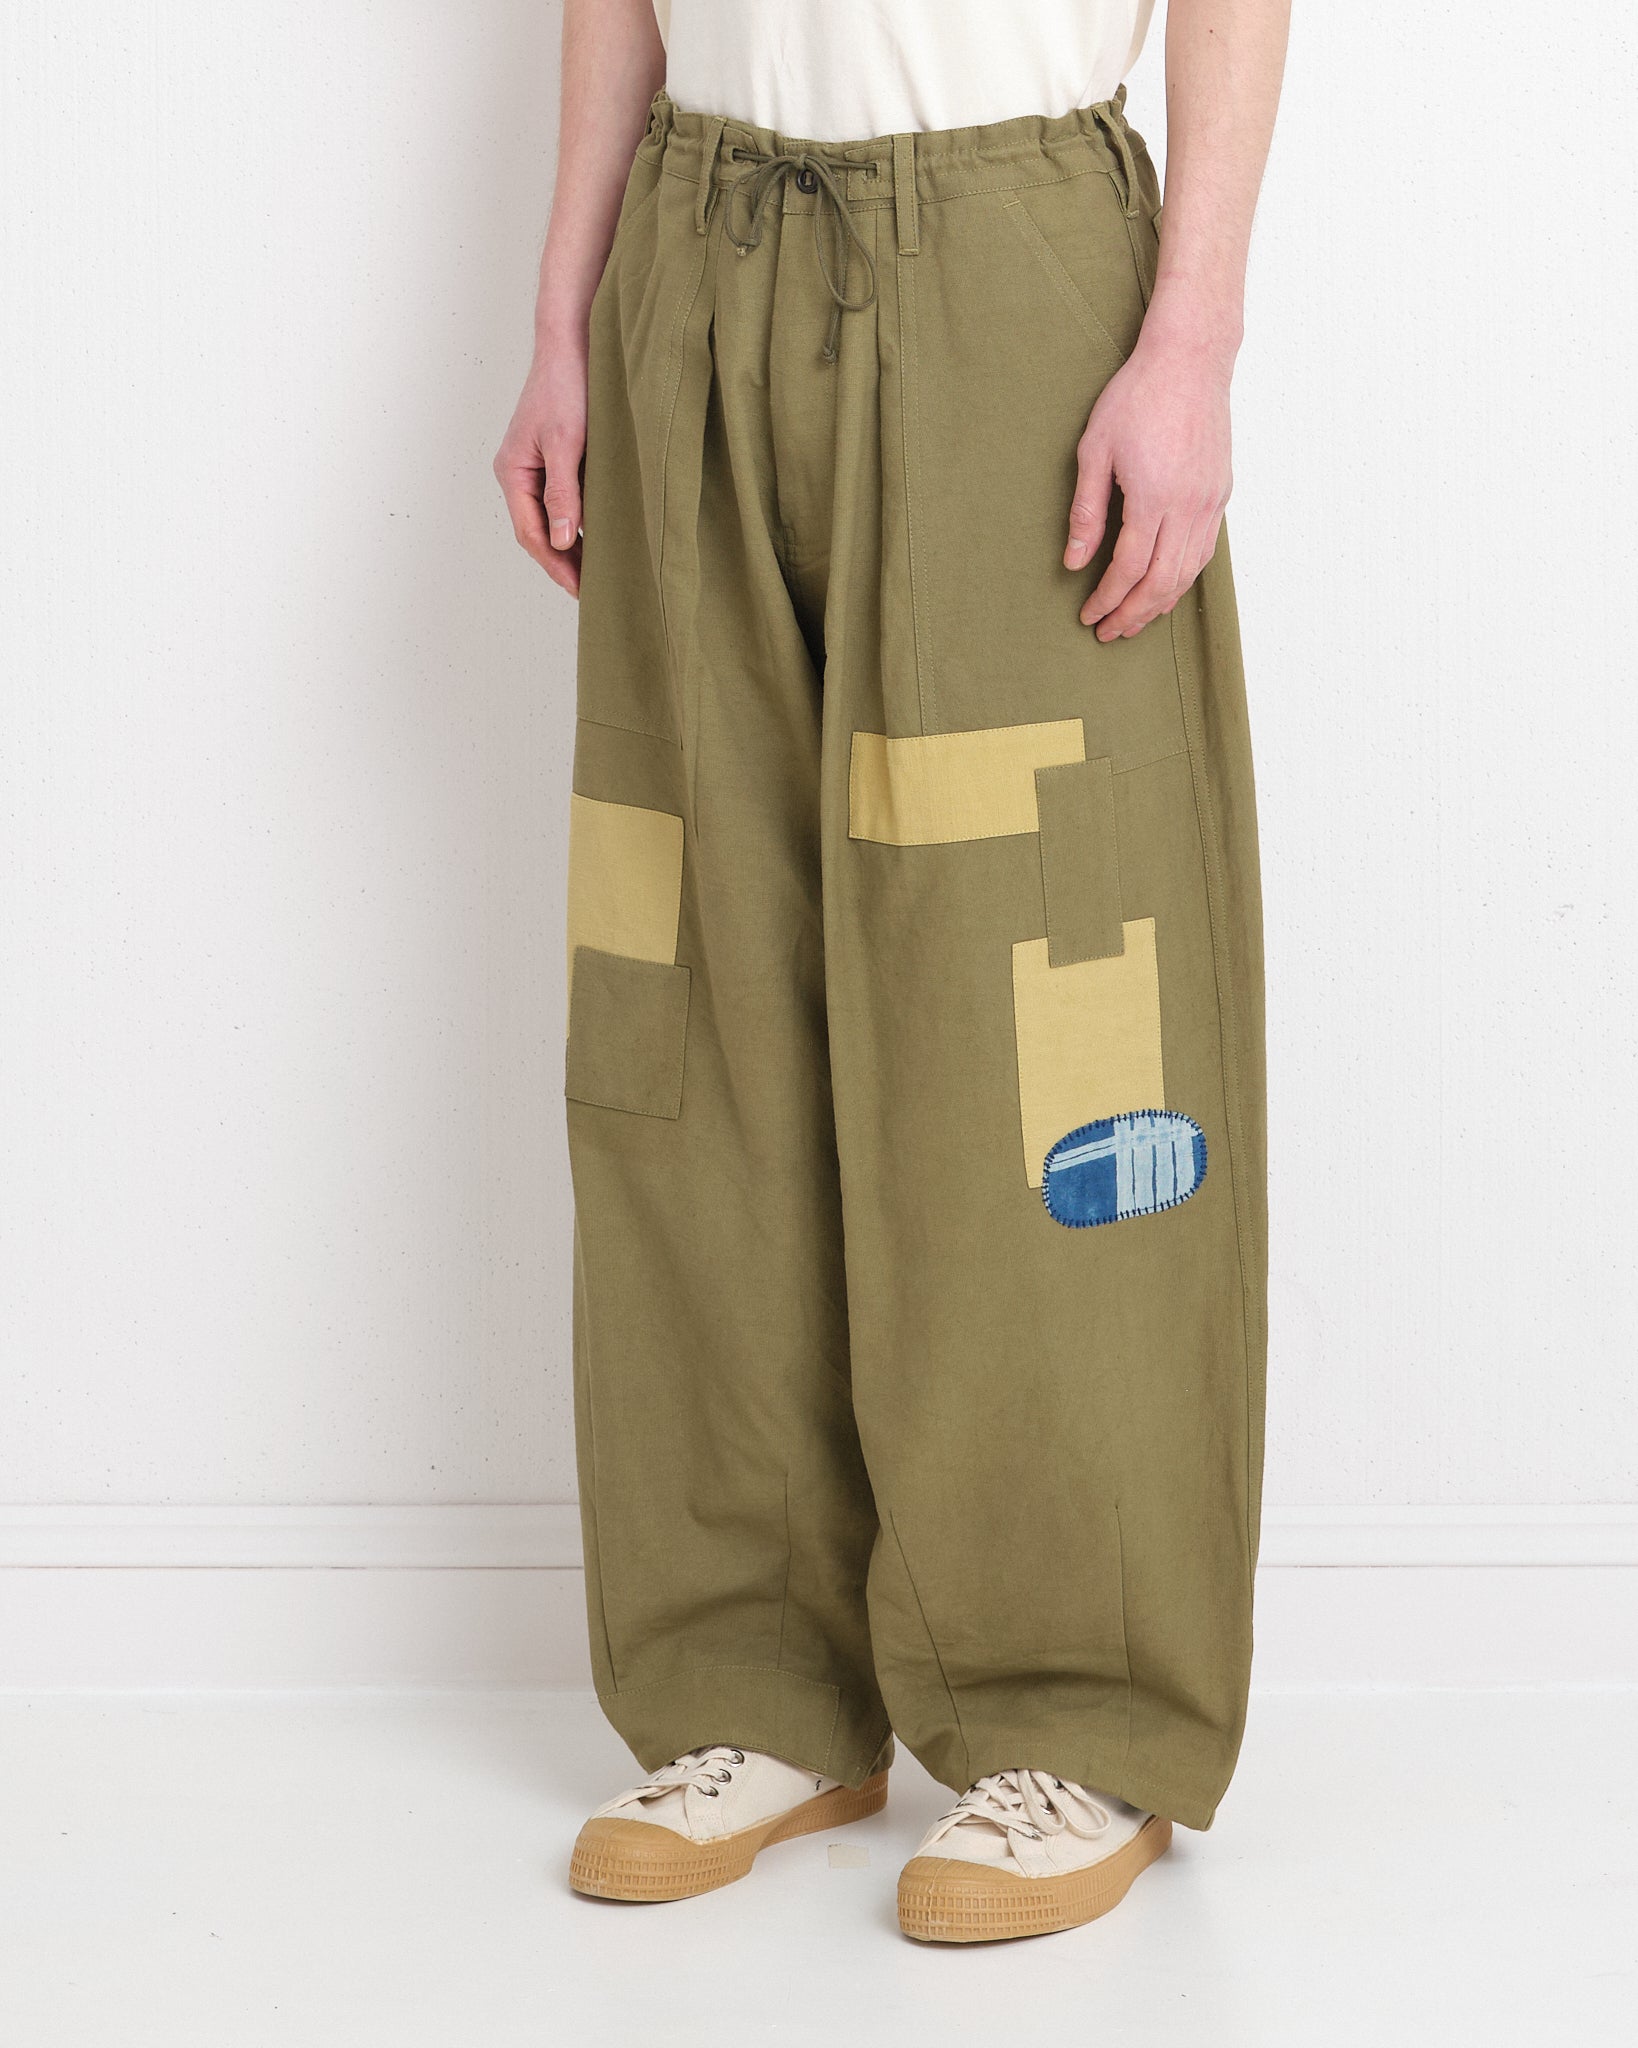 Trousers – Story mfg.